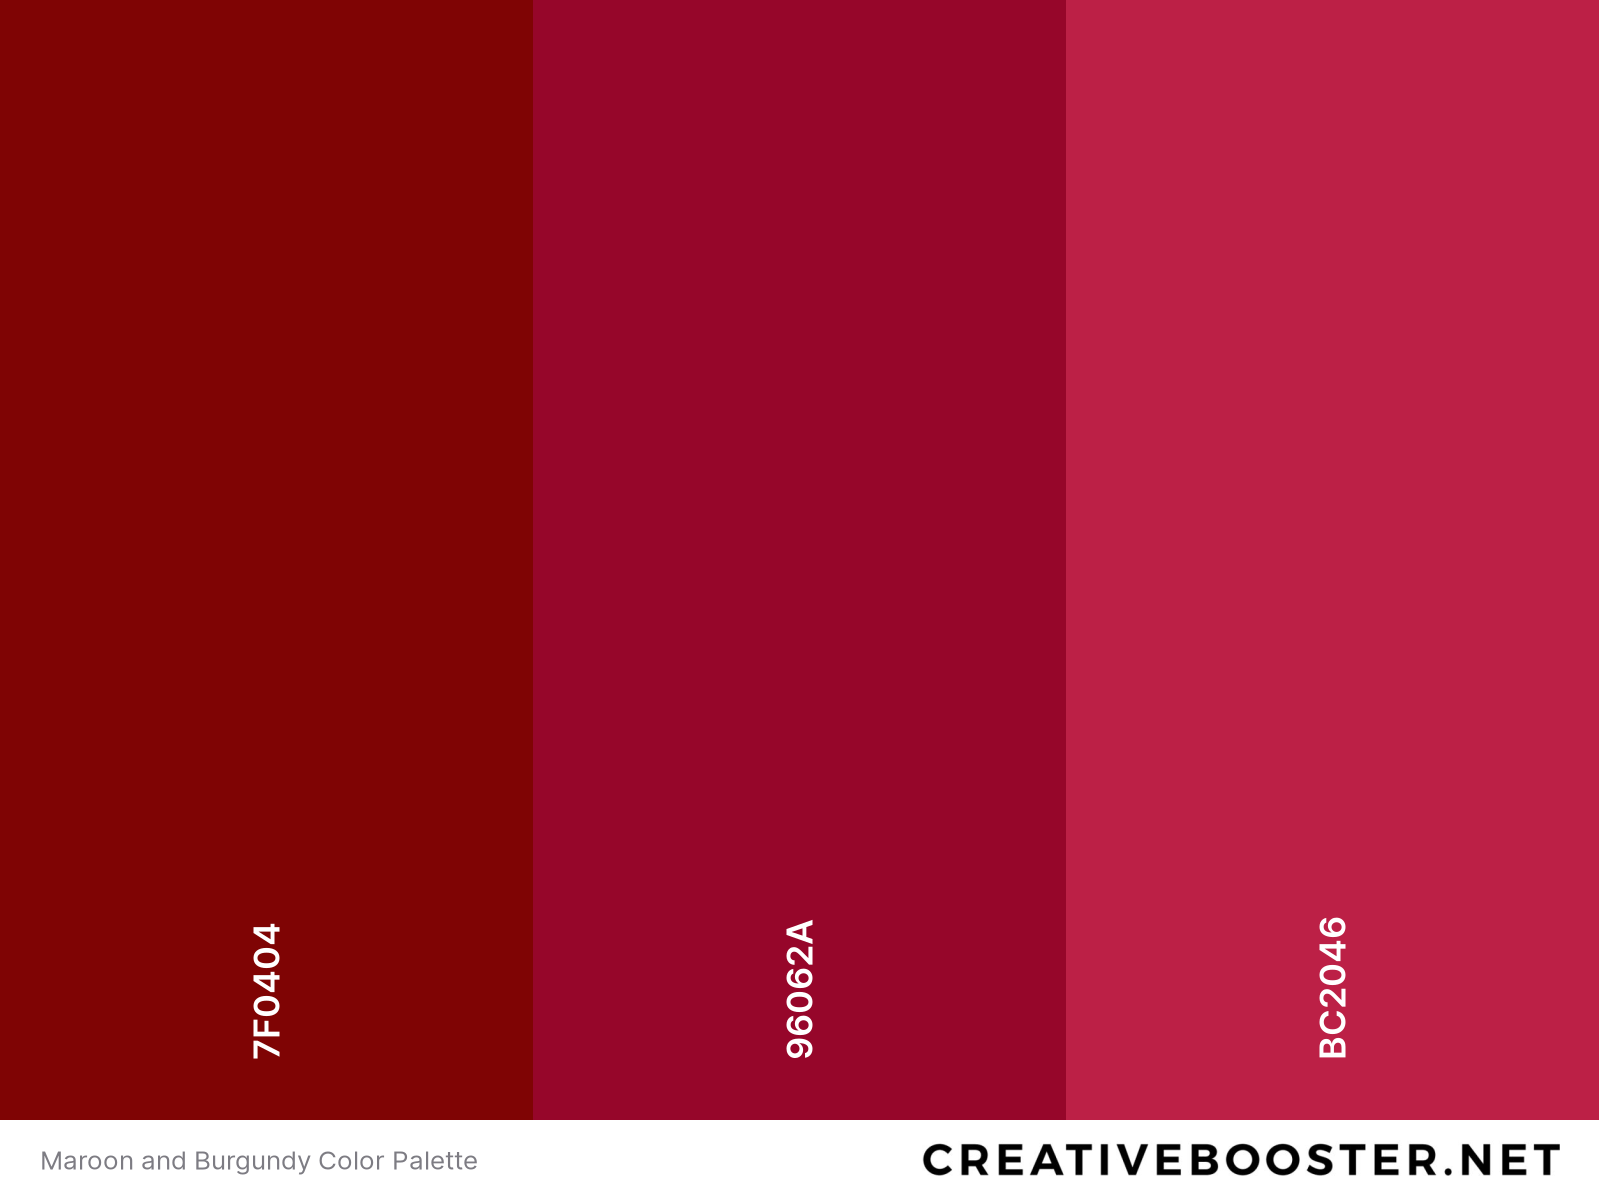 Maroon and Burgundy Color Palette